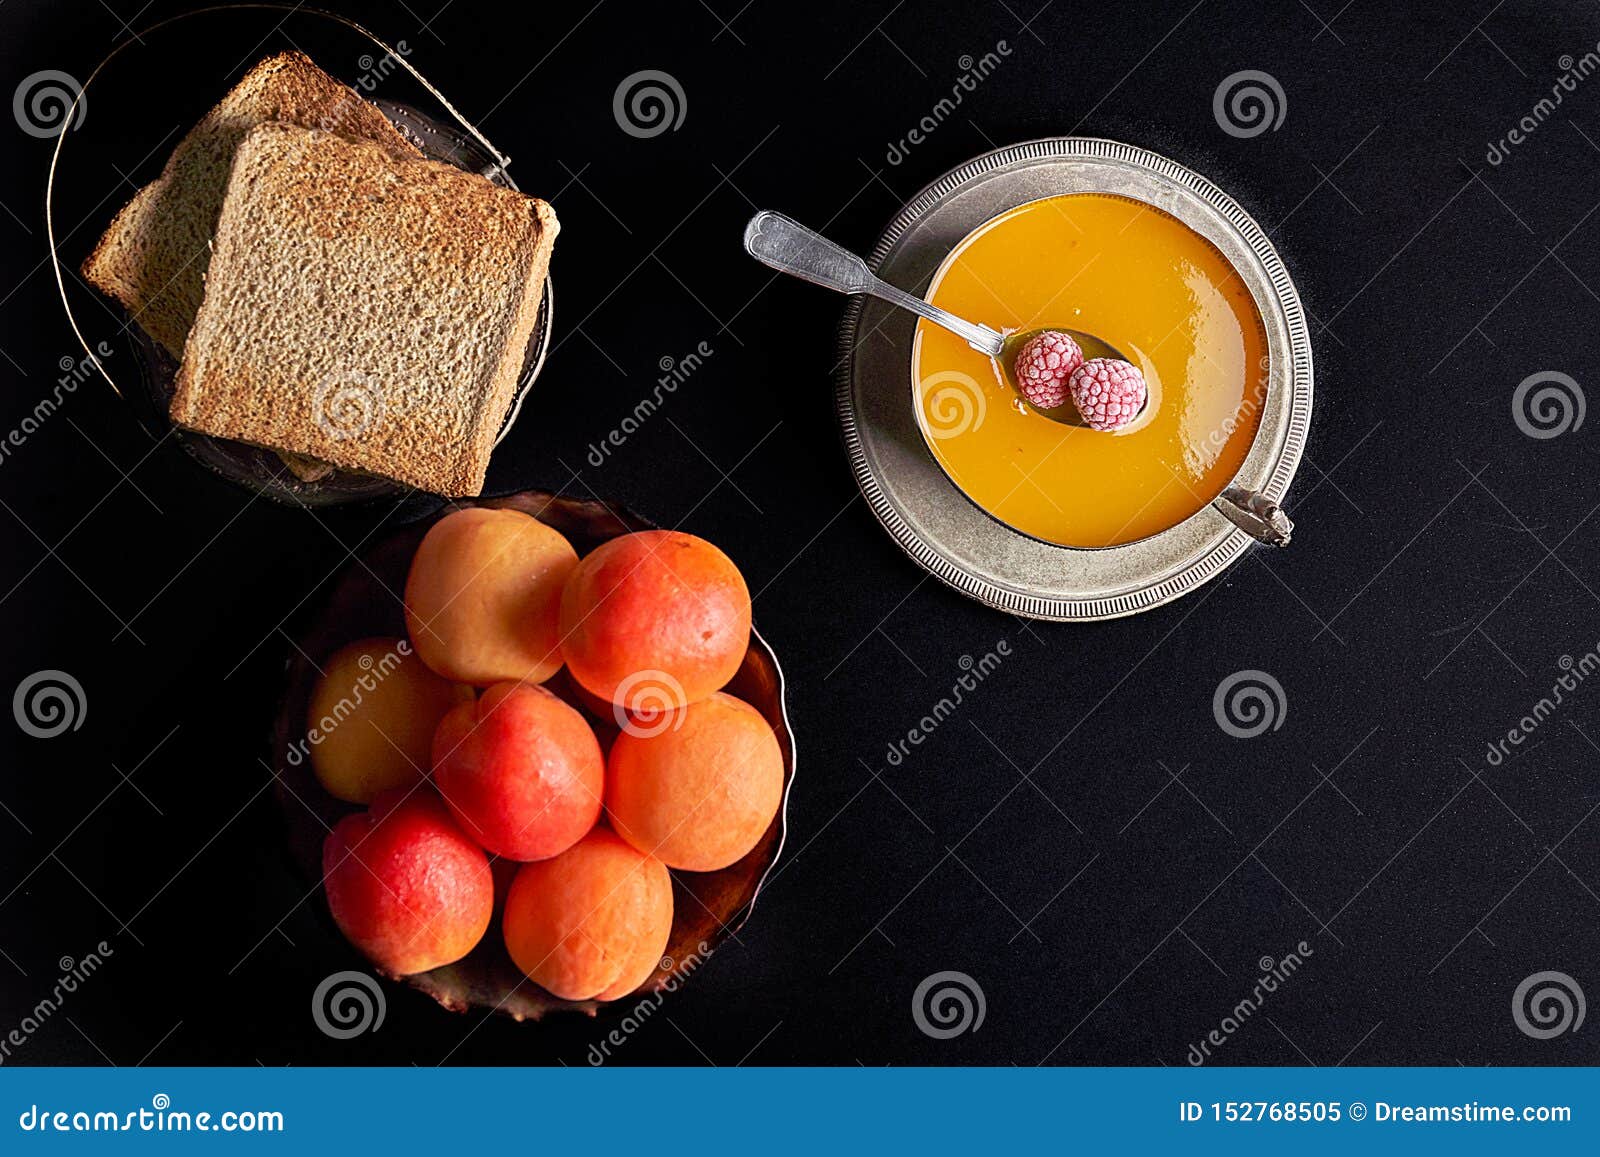 fresh apricots, apricot jam and some toasts